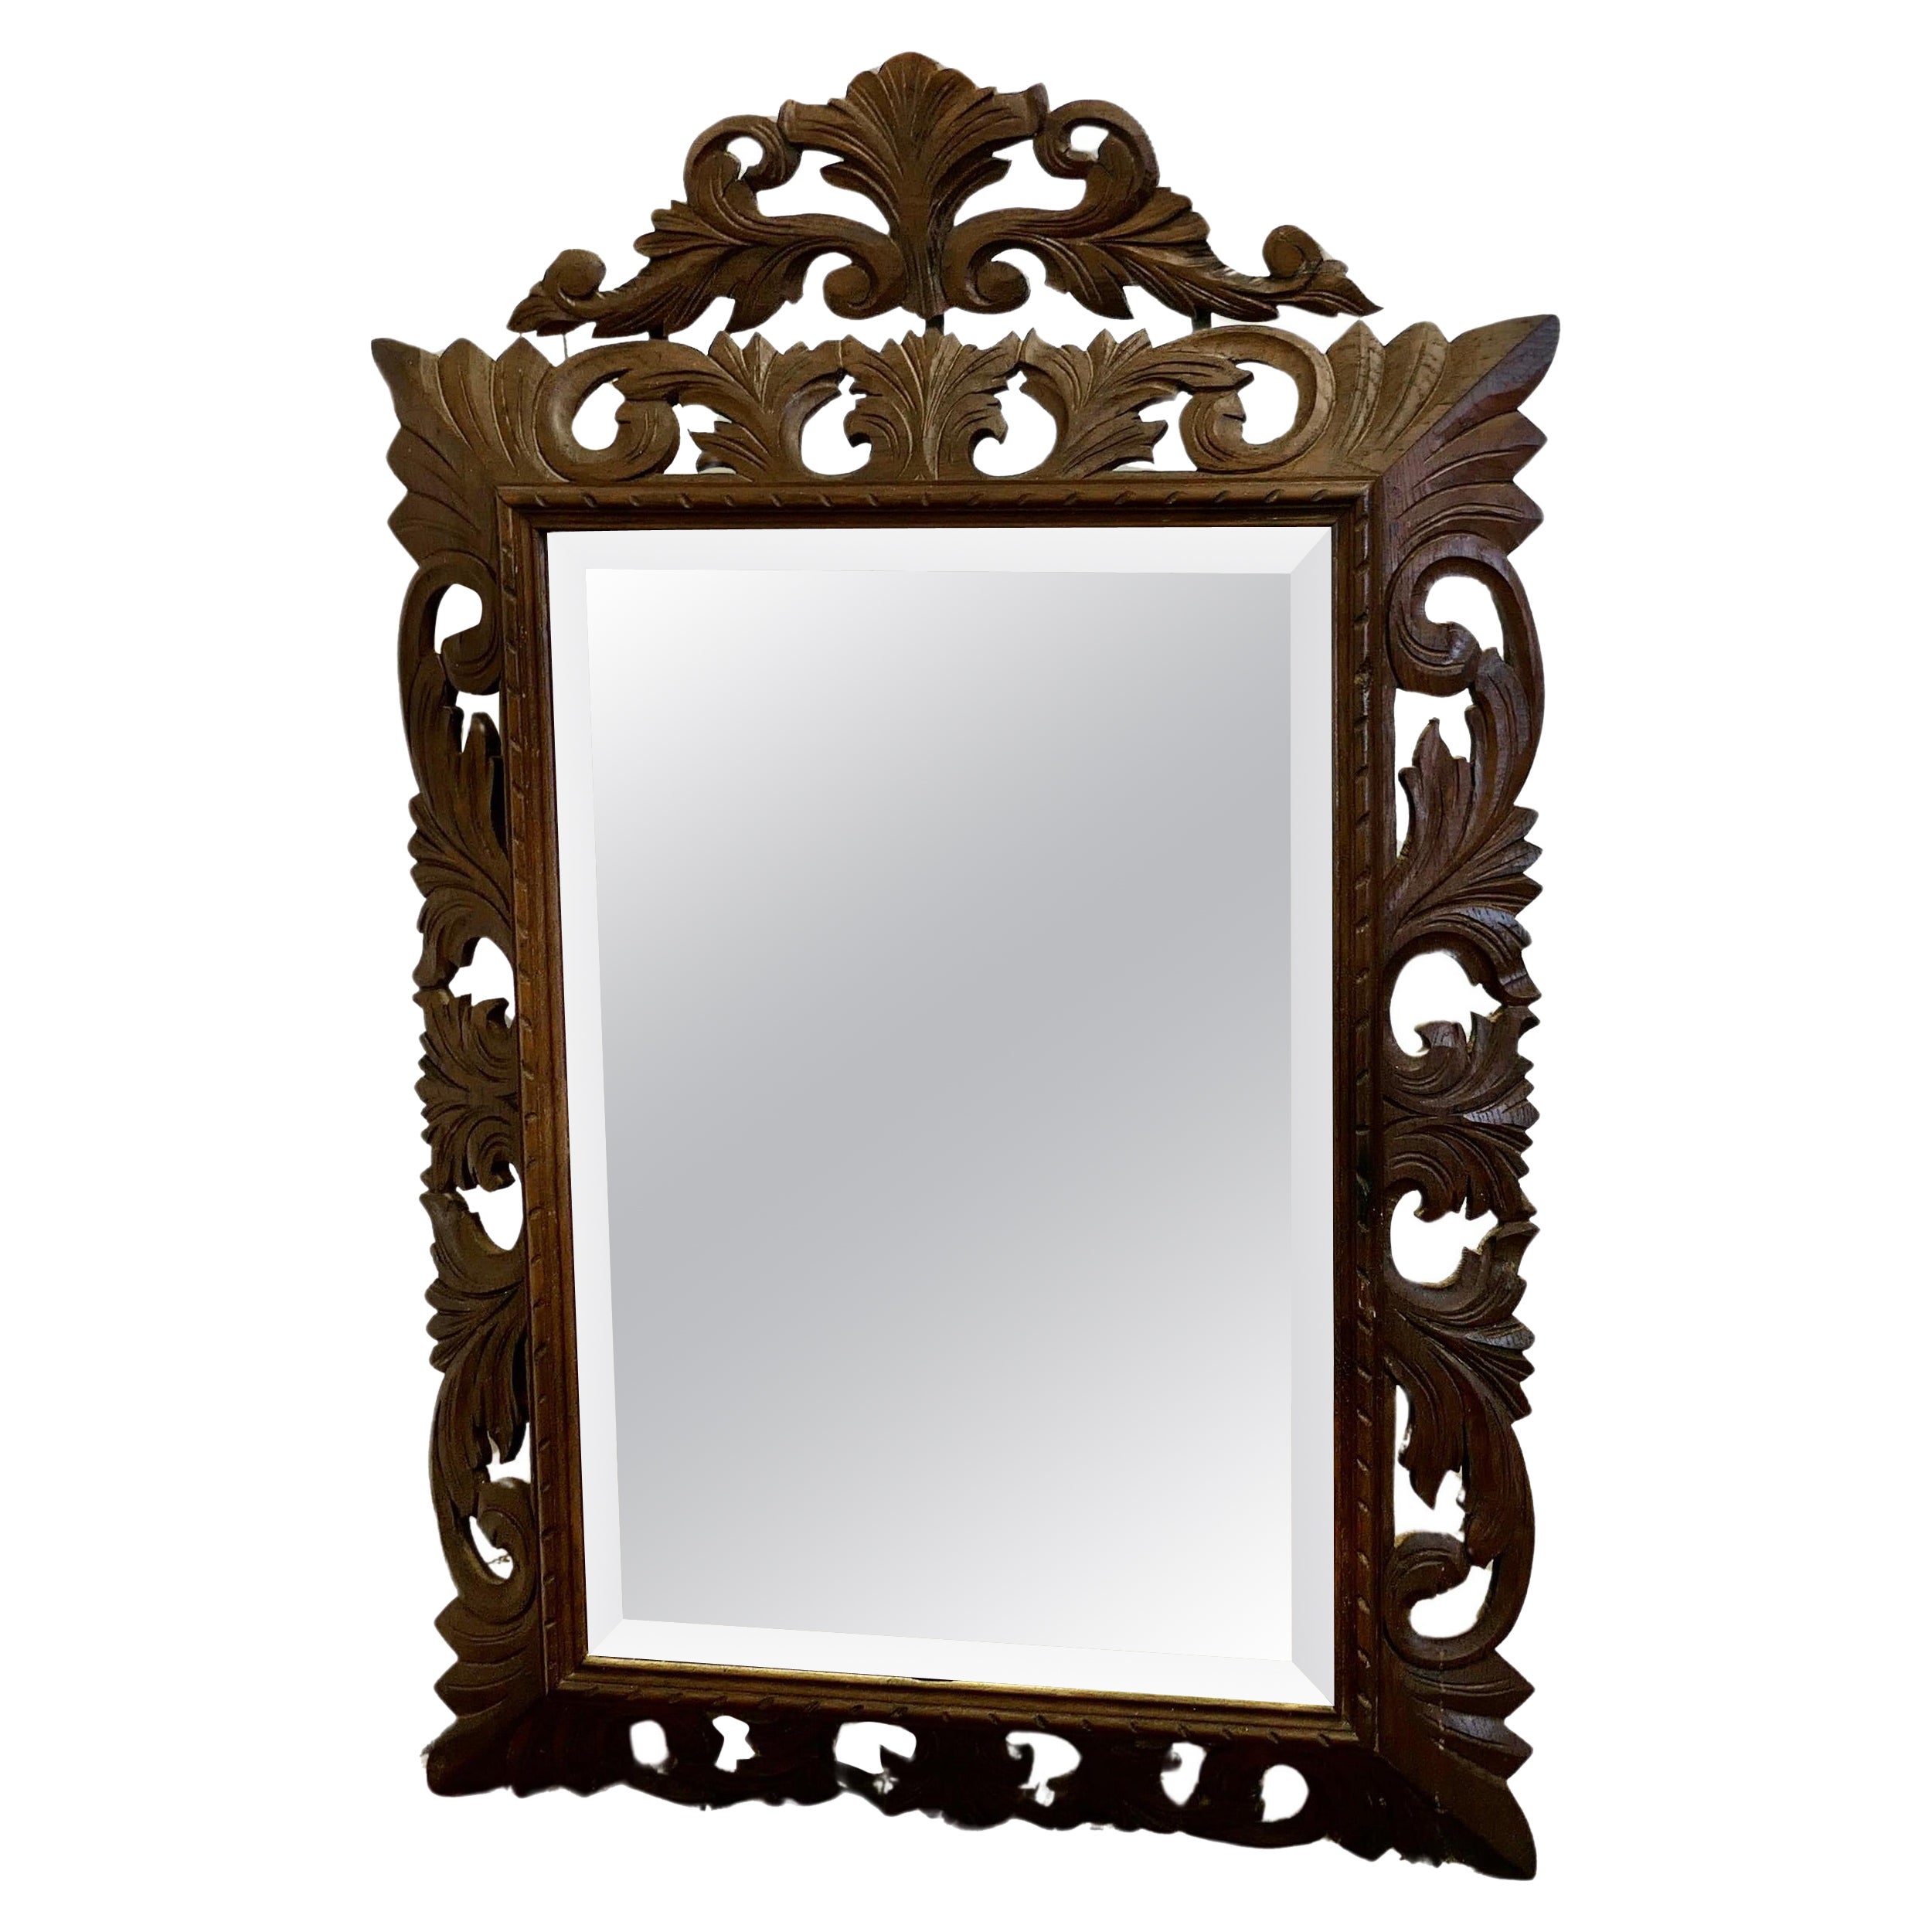 French Carved Gothic Oak Wall Mirror  The Oak Mirror Frame is Crisply Carved  For Sale